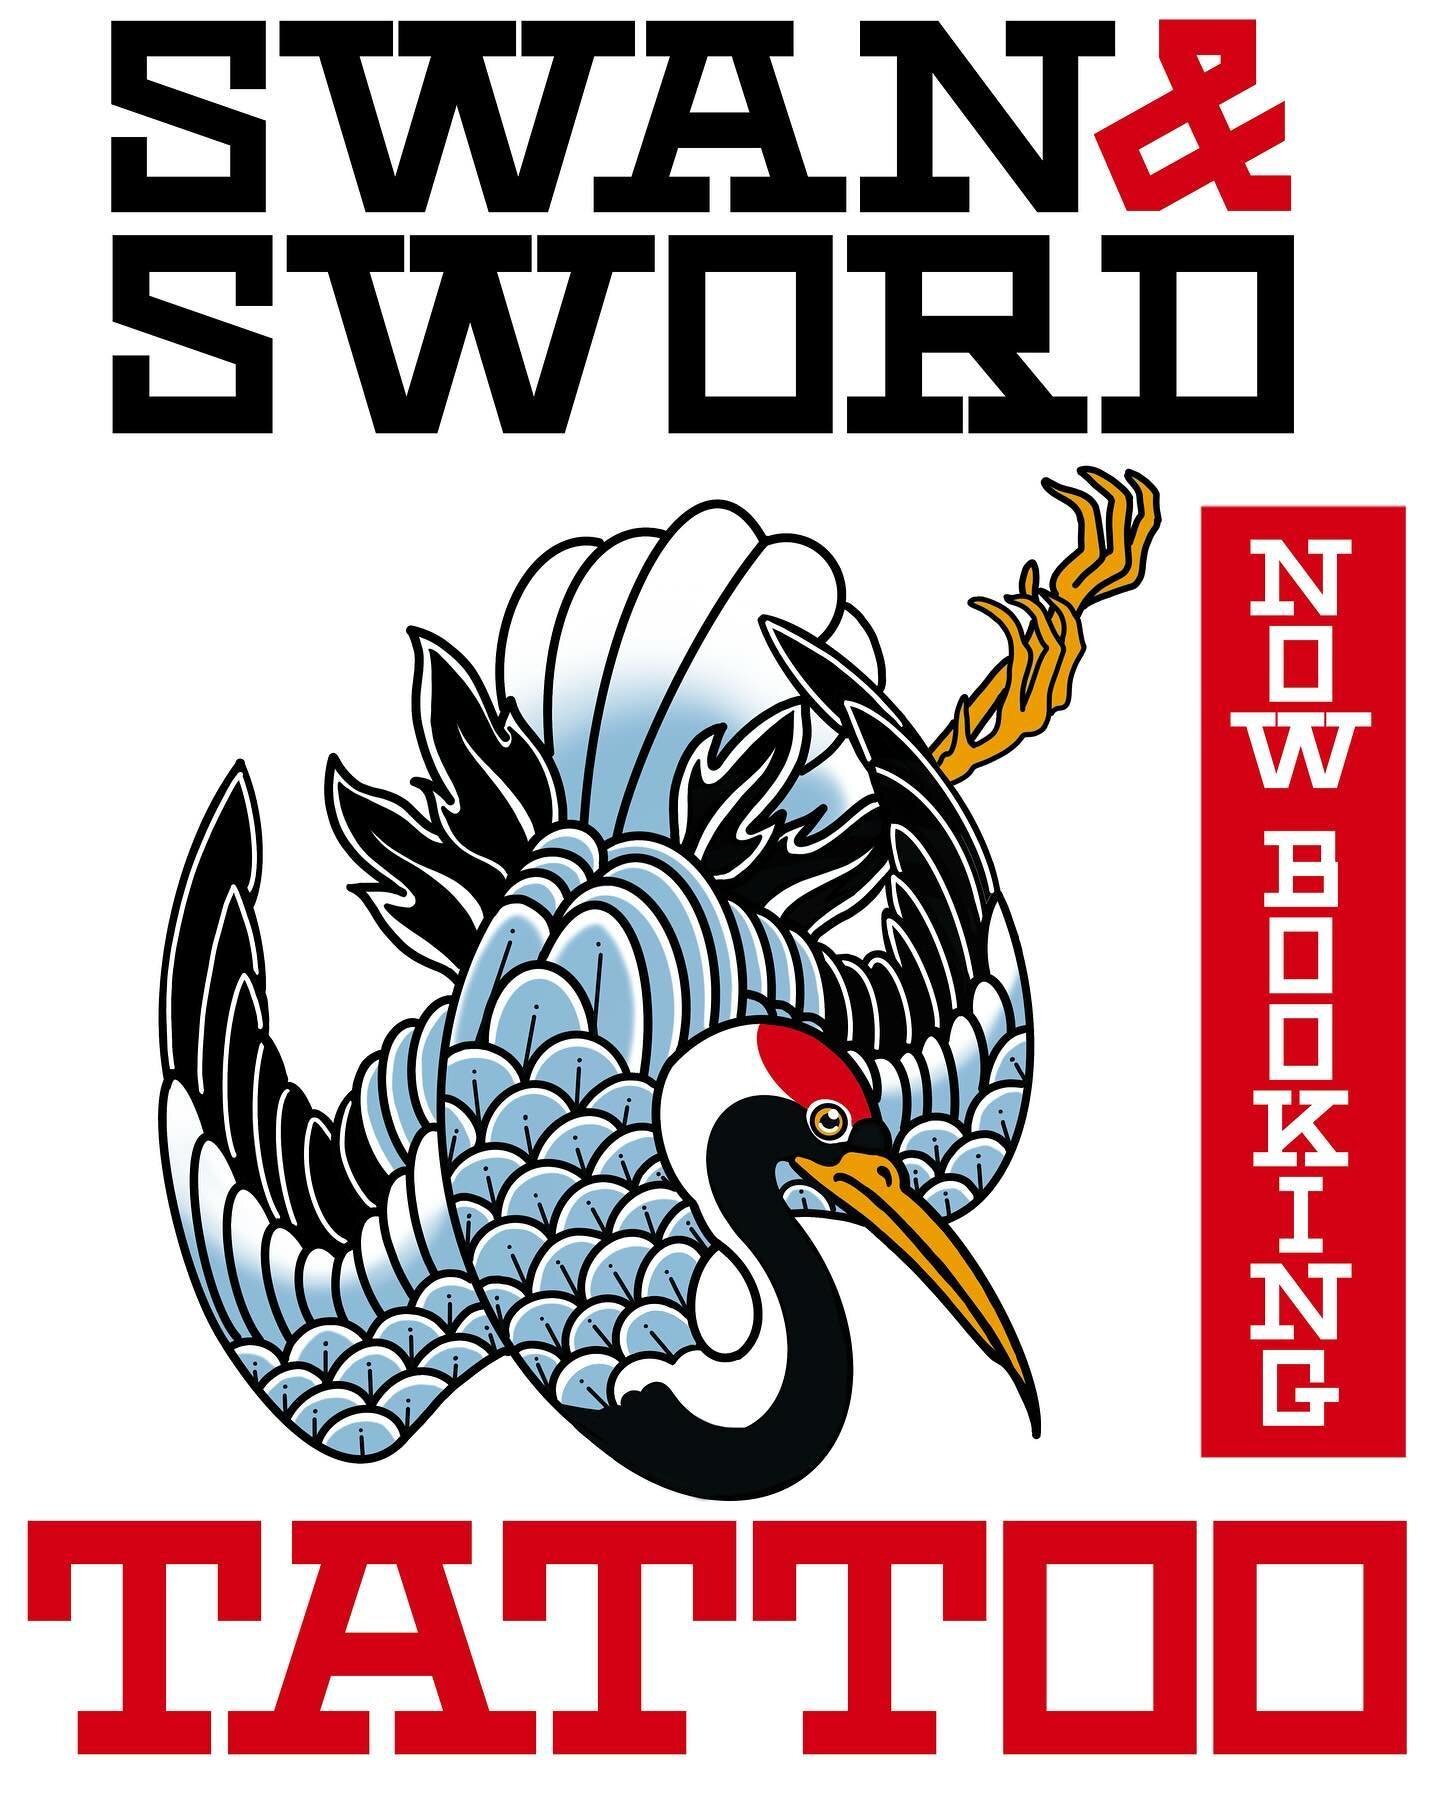 🔥 Exciting News! 🔥 

Swan and sword Tattoo is taking new clients! 🖊️ Book your spot now with our artists:

🎨 @andregarciaart: Japanese inspired, Anime/Manga, and pop culture/Nerdy tattoos. 🌸🗡️

🖌️ @tofuthiefzzz (aka Lynnz Perry) : Black &amp; 